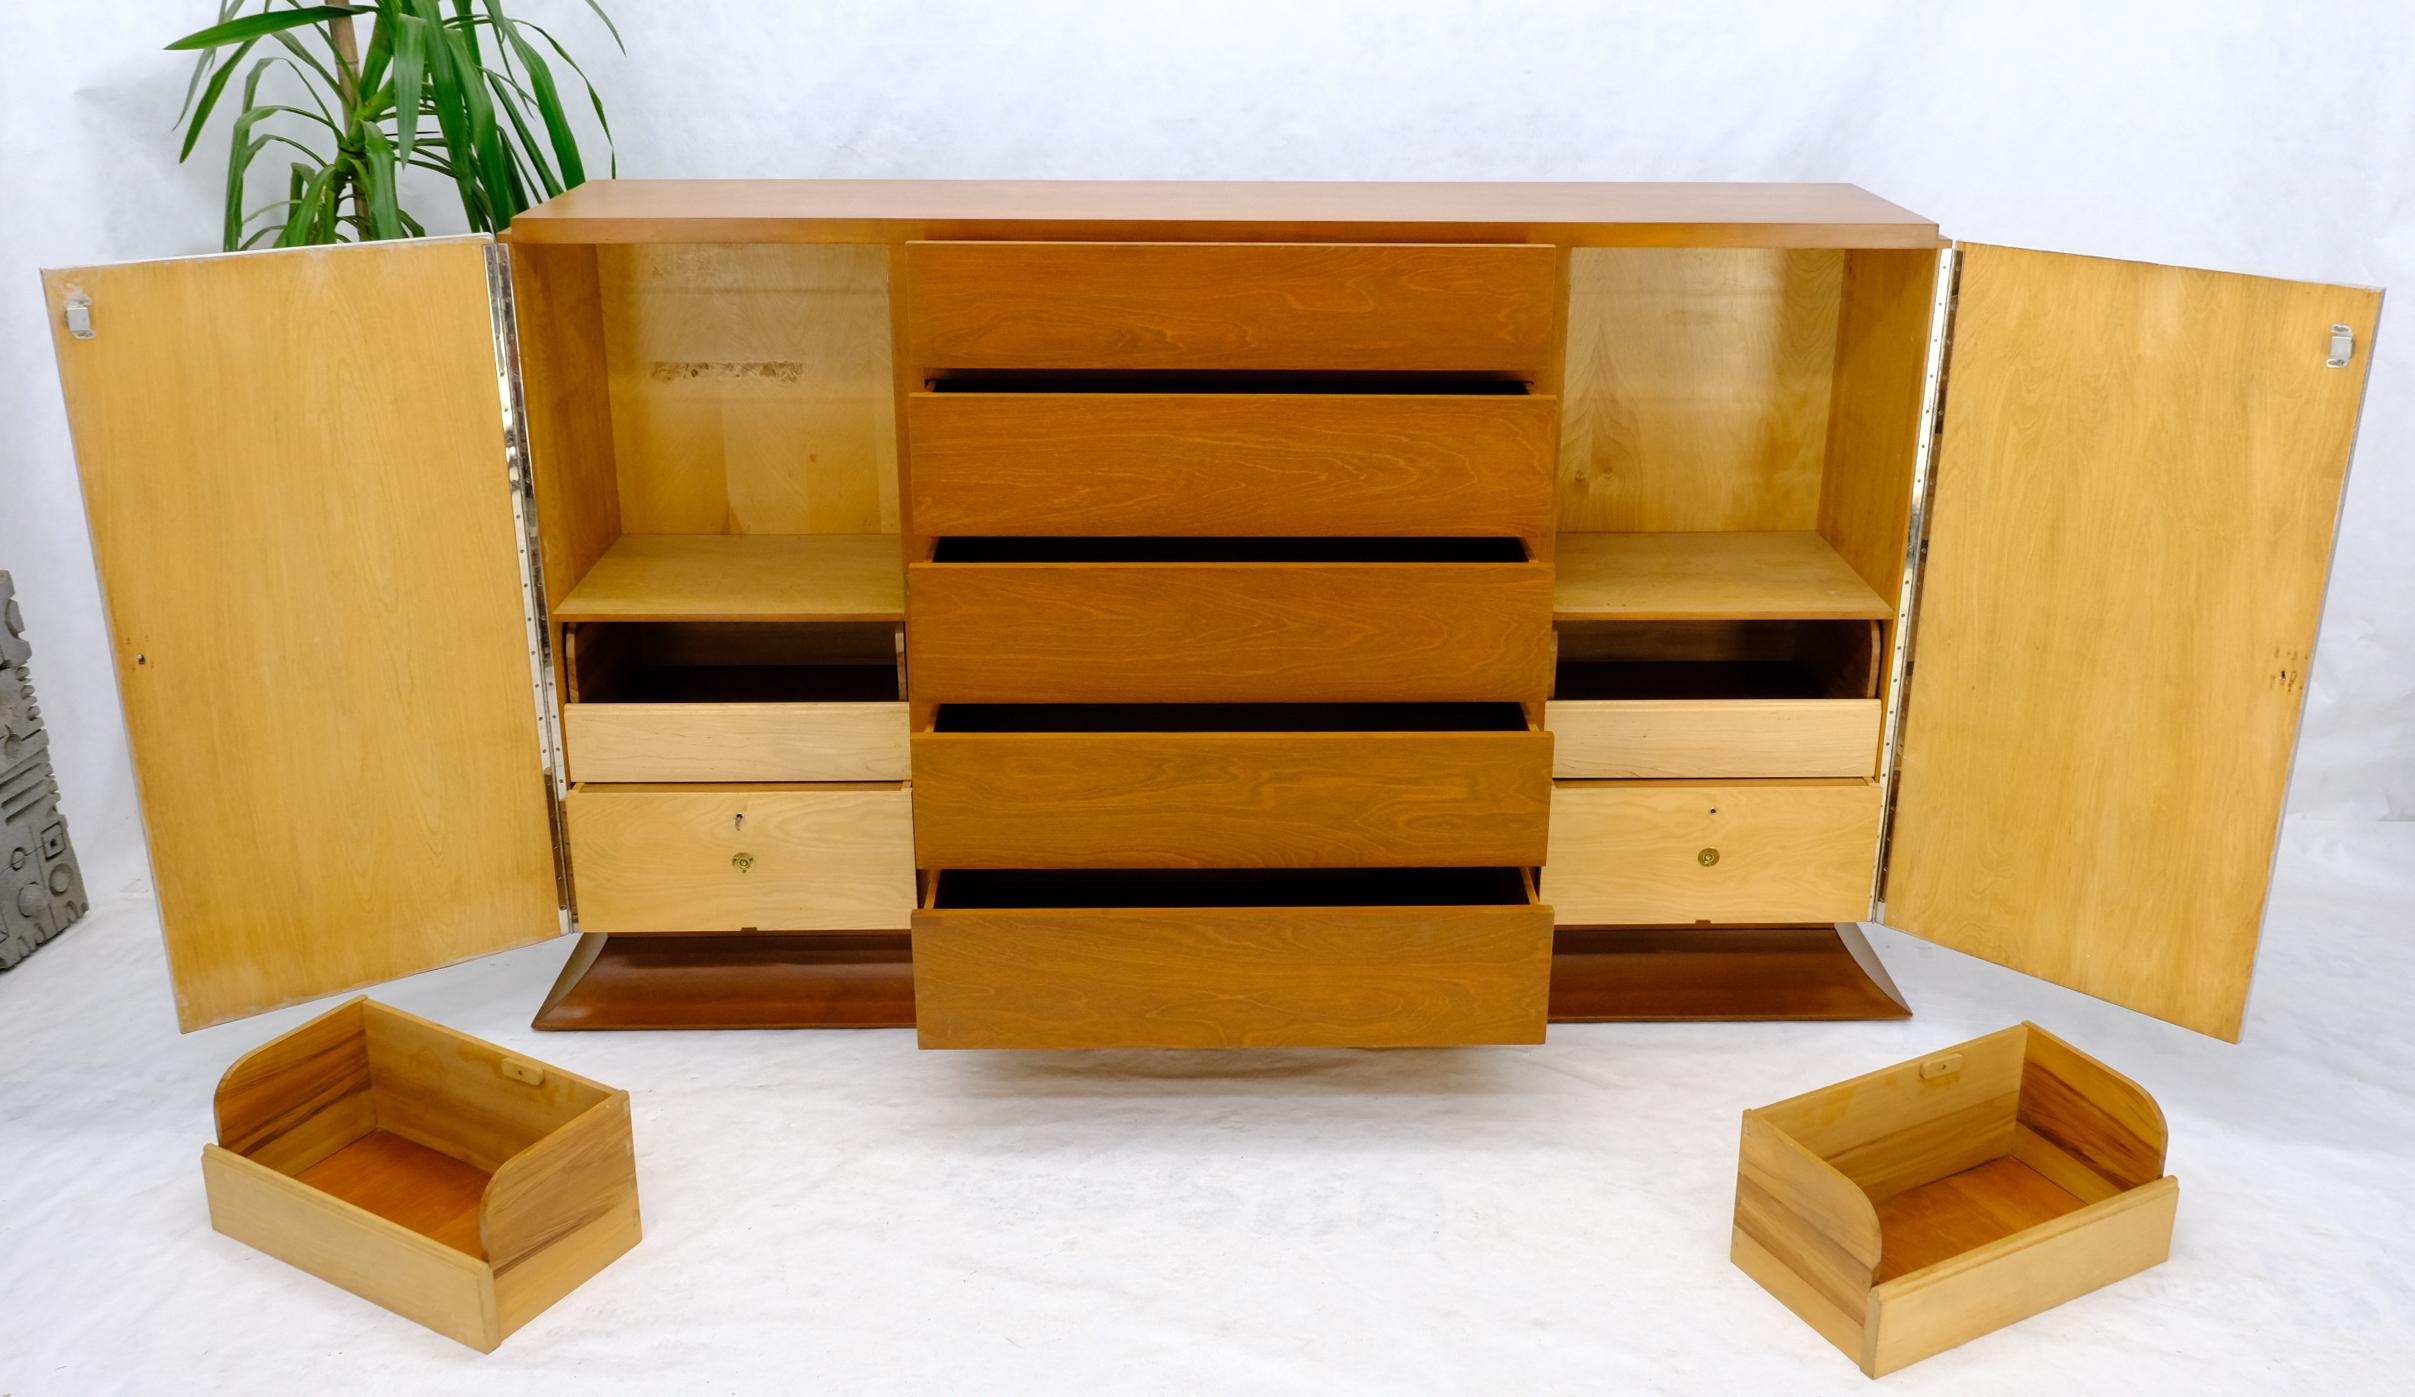 Art Deco 5 Drawers w/ 2 Secret Drawers 2 Leather Diamond Doors Compartment In Excellent Condition For Sale In Rockaway, NJ